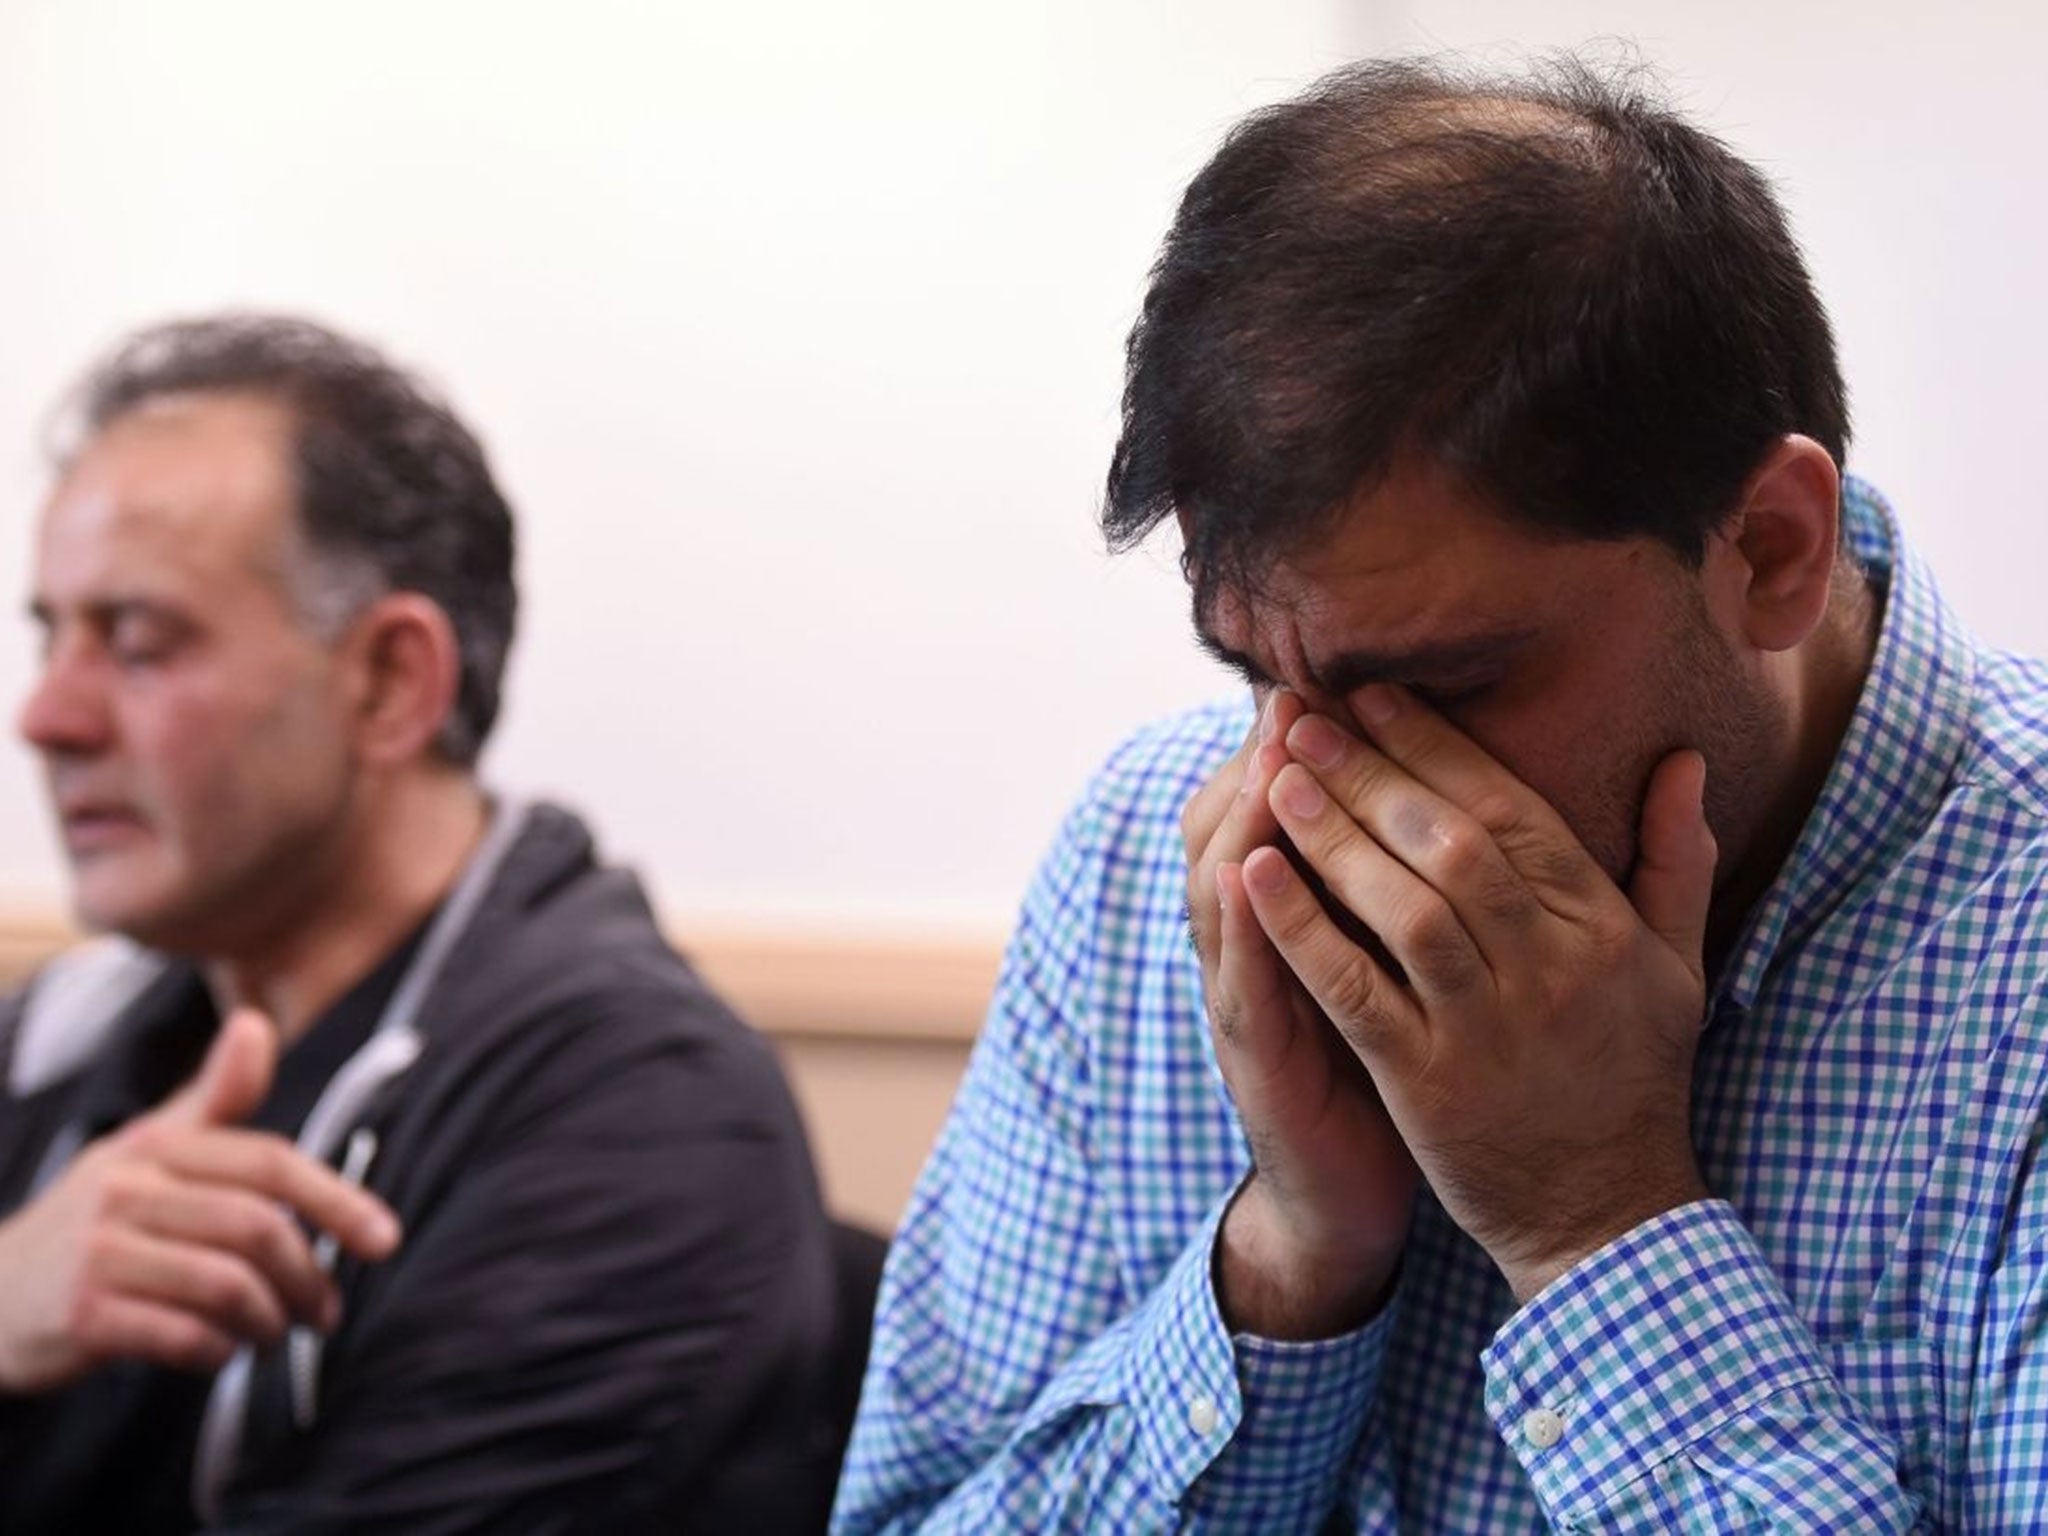 Akhtar Iqbal, husband of Sugra Dawood (L), and Mohammad Shoaib, husband of Khadija Dawood, react during a news conference to appeal for their return